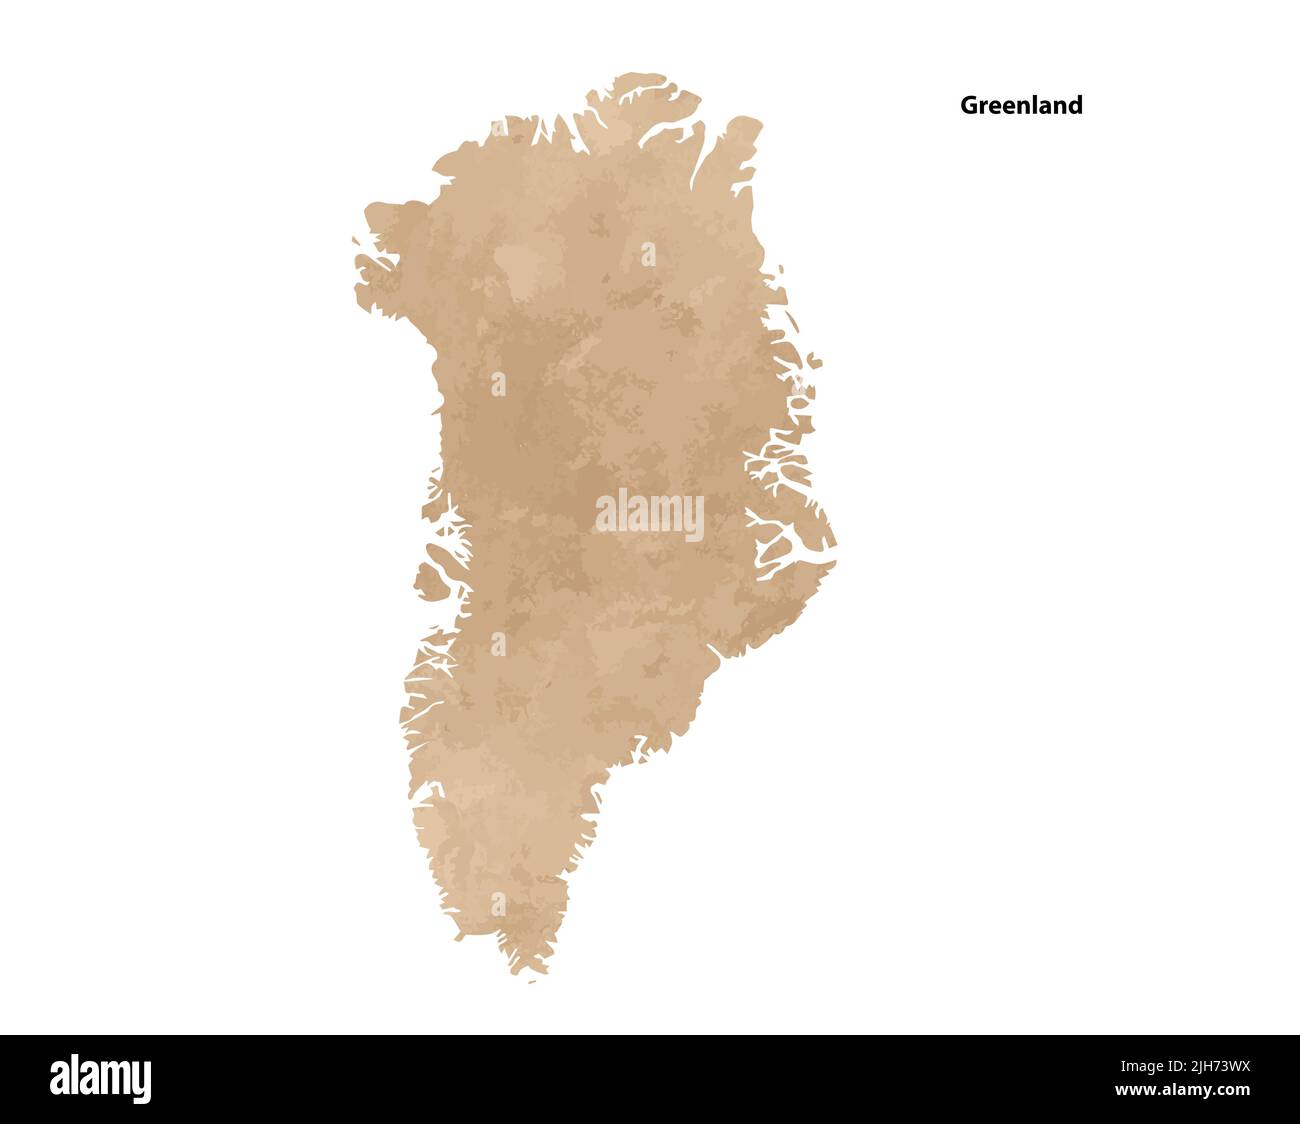 Old vintage paper textured map of Greenland Country - Vector illustration Stock Vector